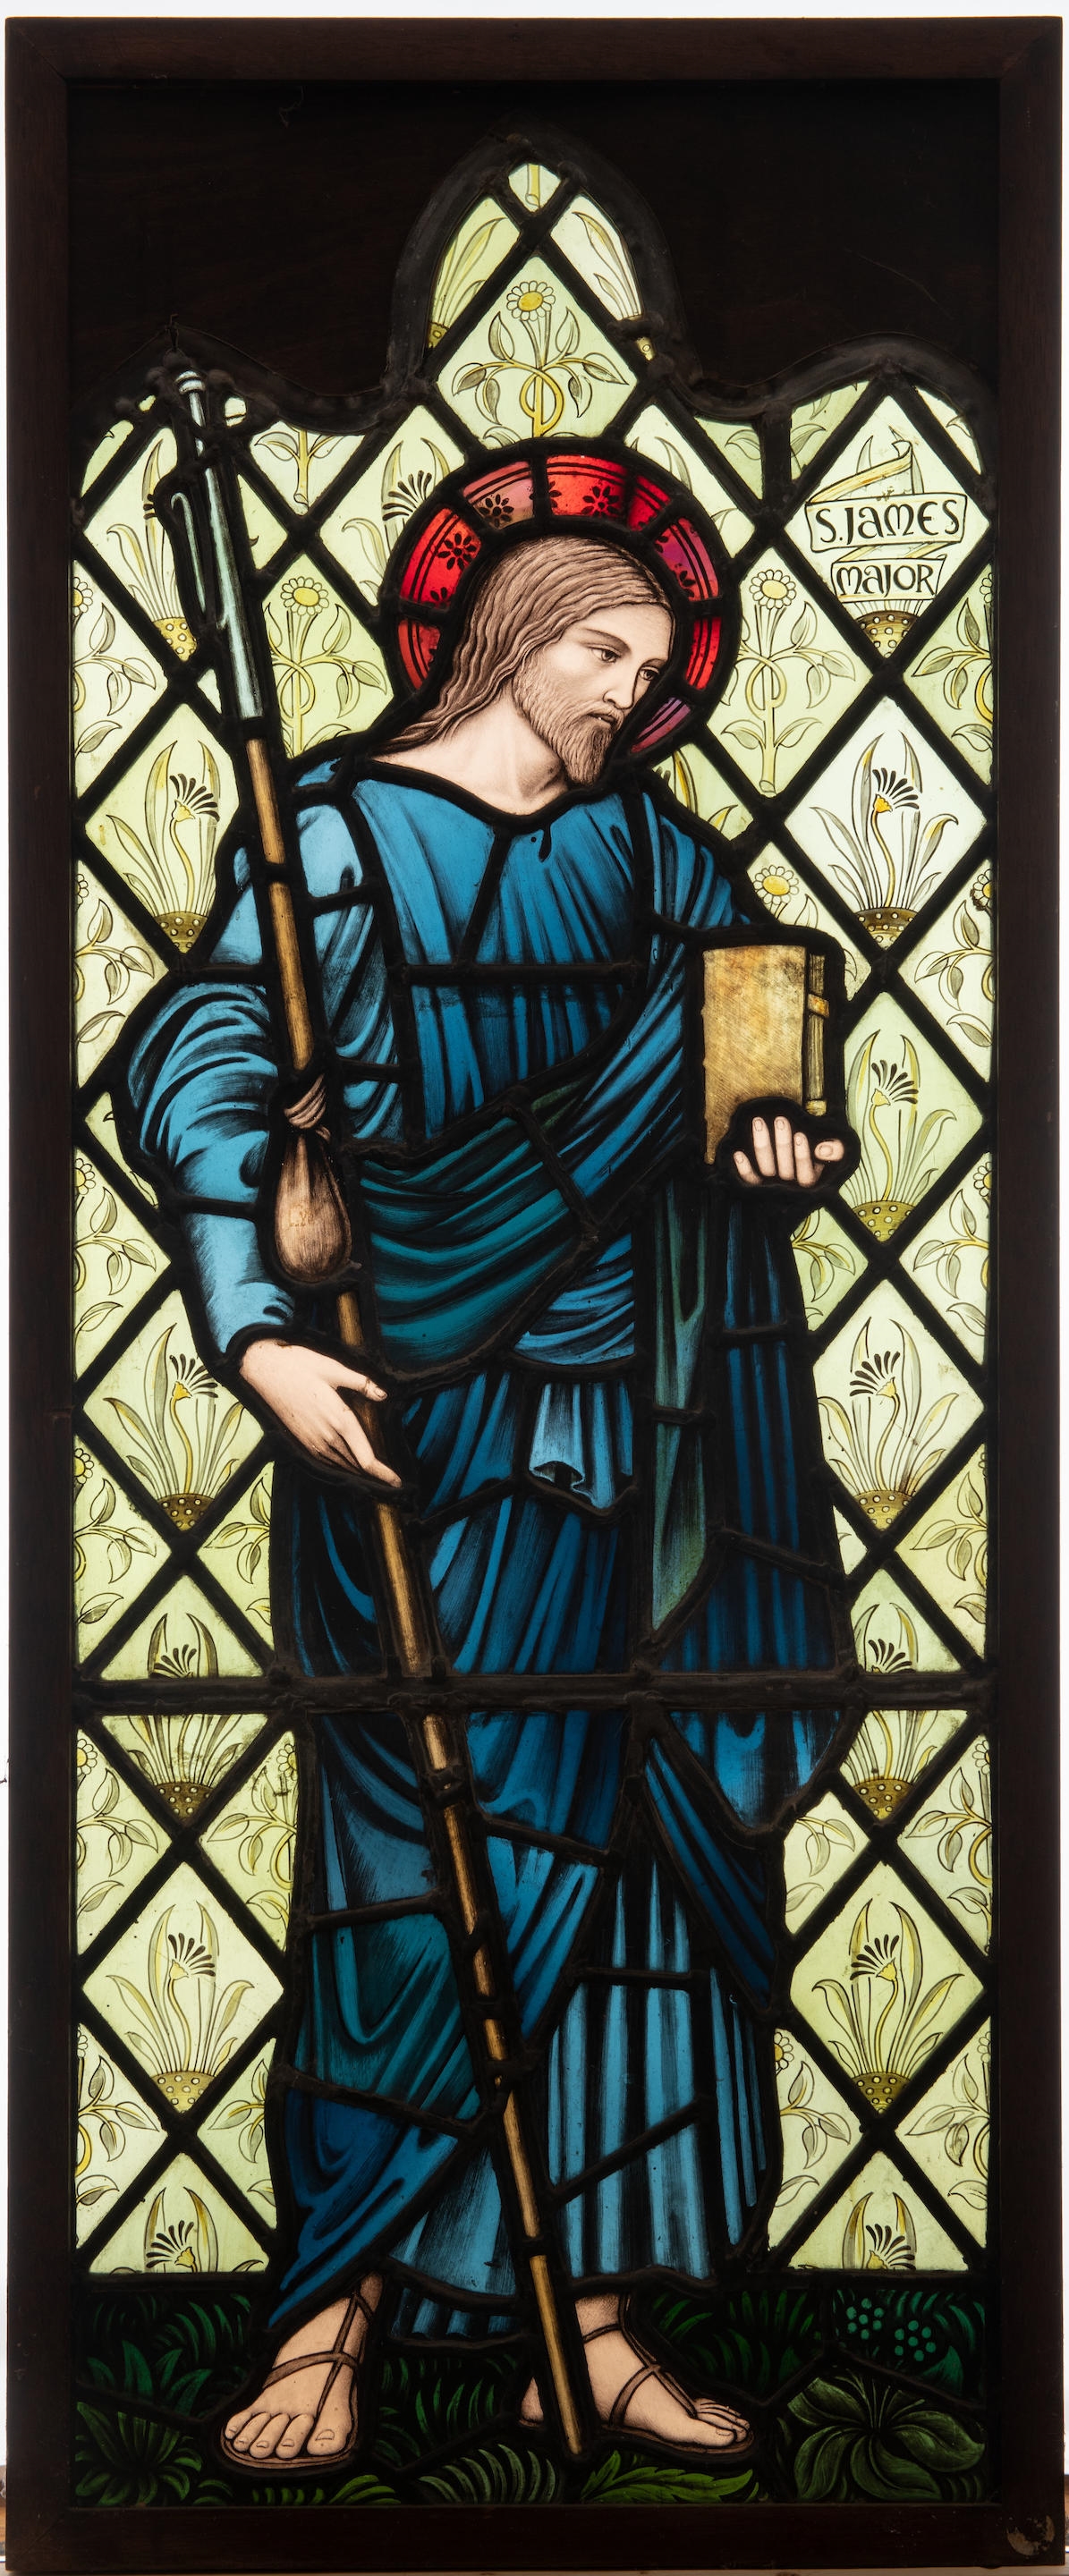 St. James
circa 1880
for William Morris & Co, leaded and enameled stained glass
39 1/4in x 14 1/2in (99.5cm x 36cm - Edward Burne-Jones